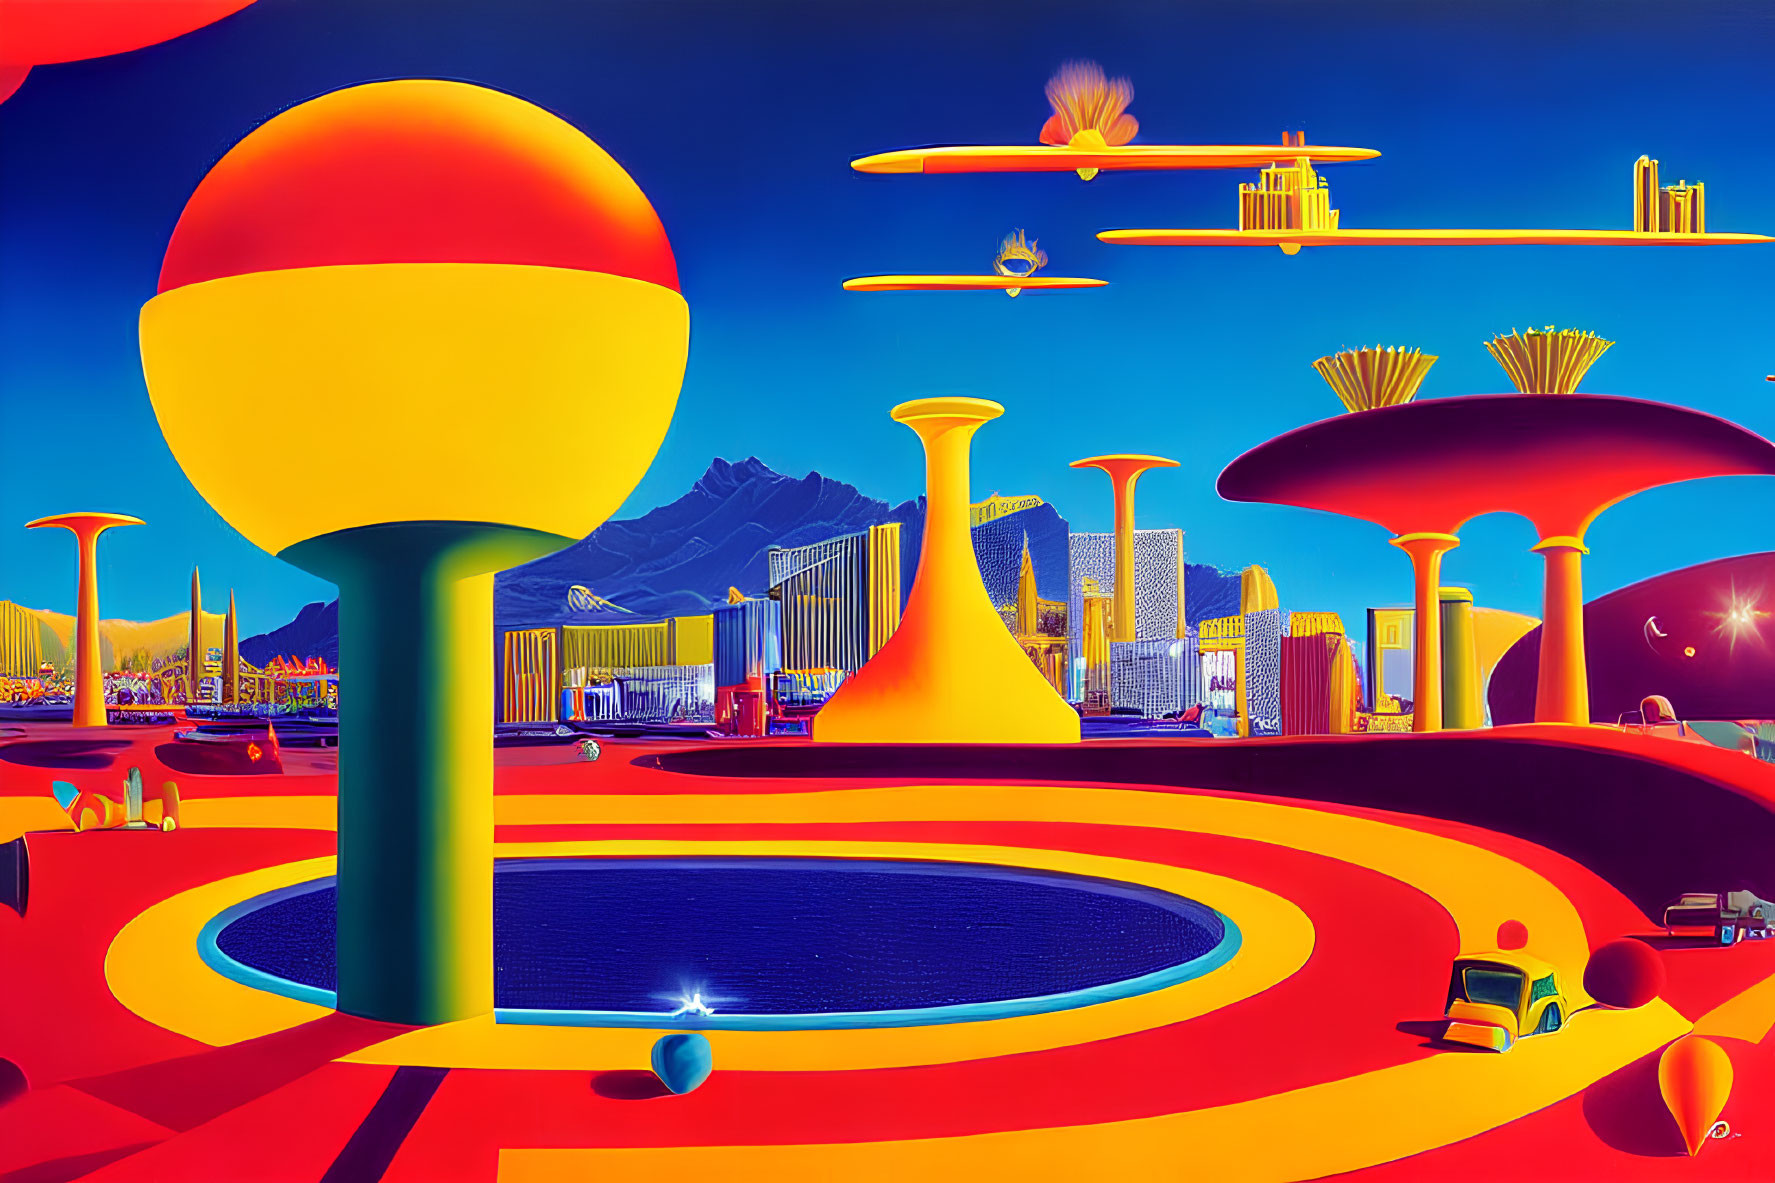 Futuristic landscape with mushroom structures, pool, and mountains in utopian city scene